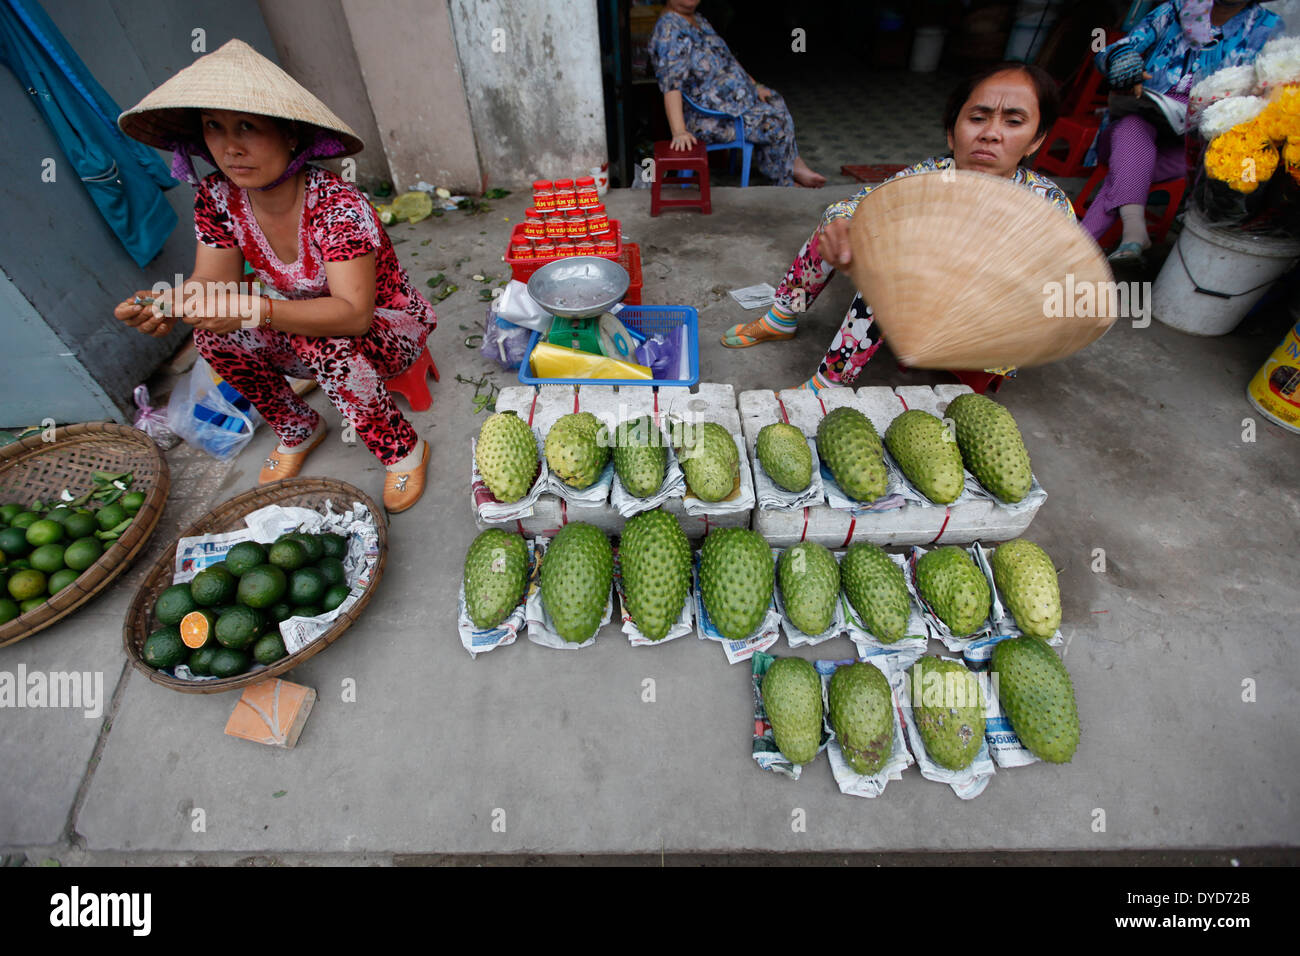 Women sell fruits at a market in Can Tho province, Vietnam Stock Photo